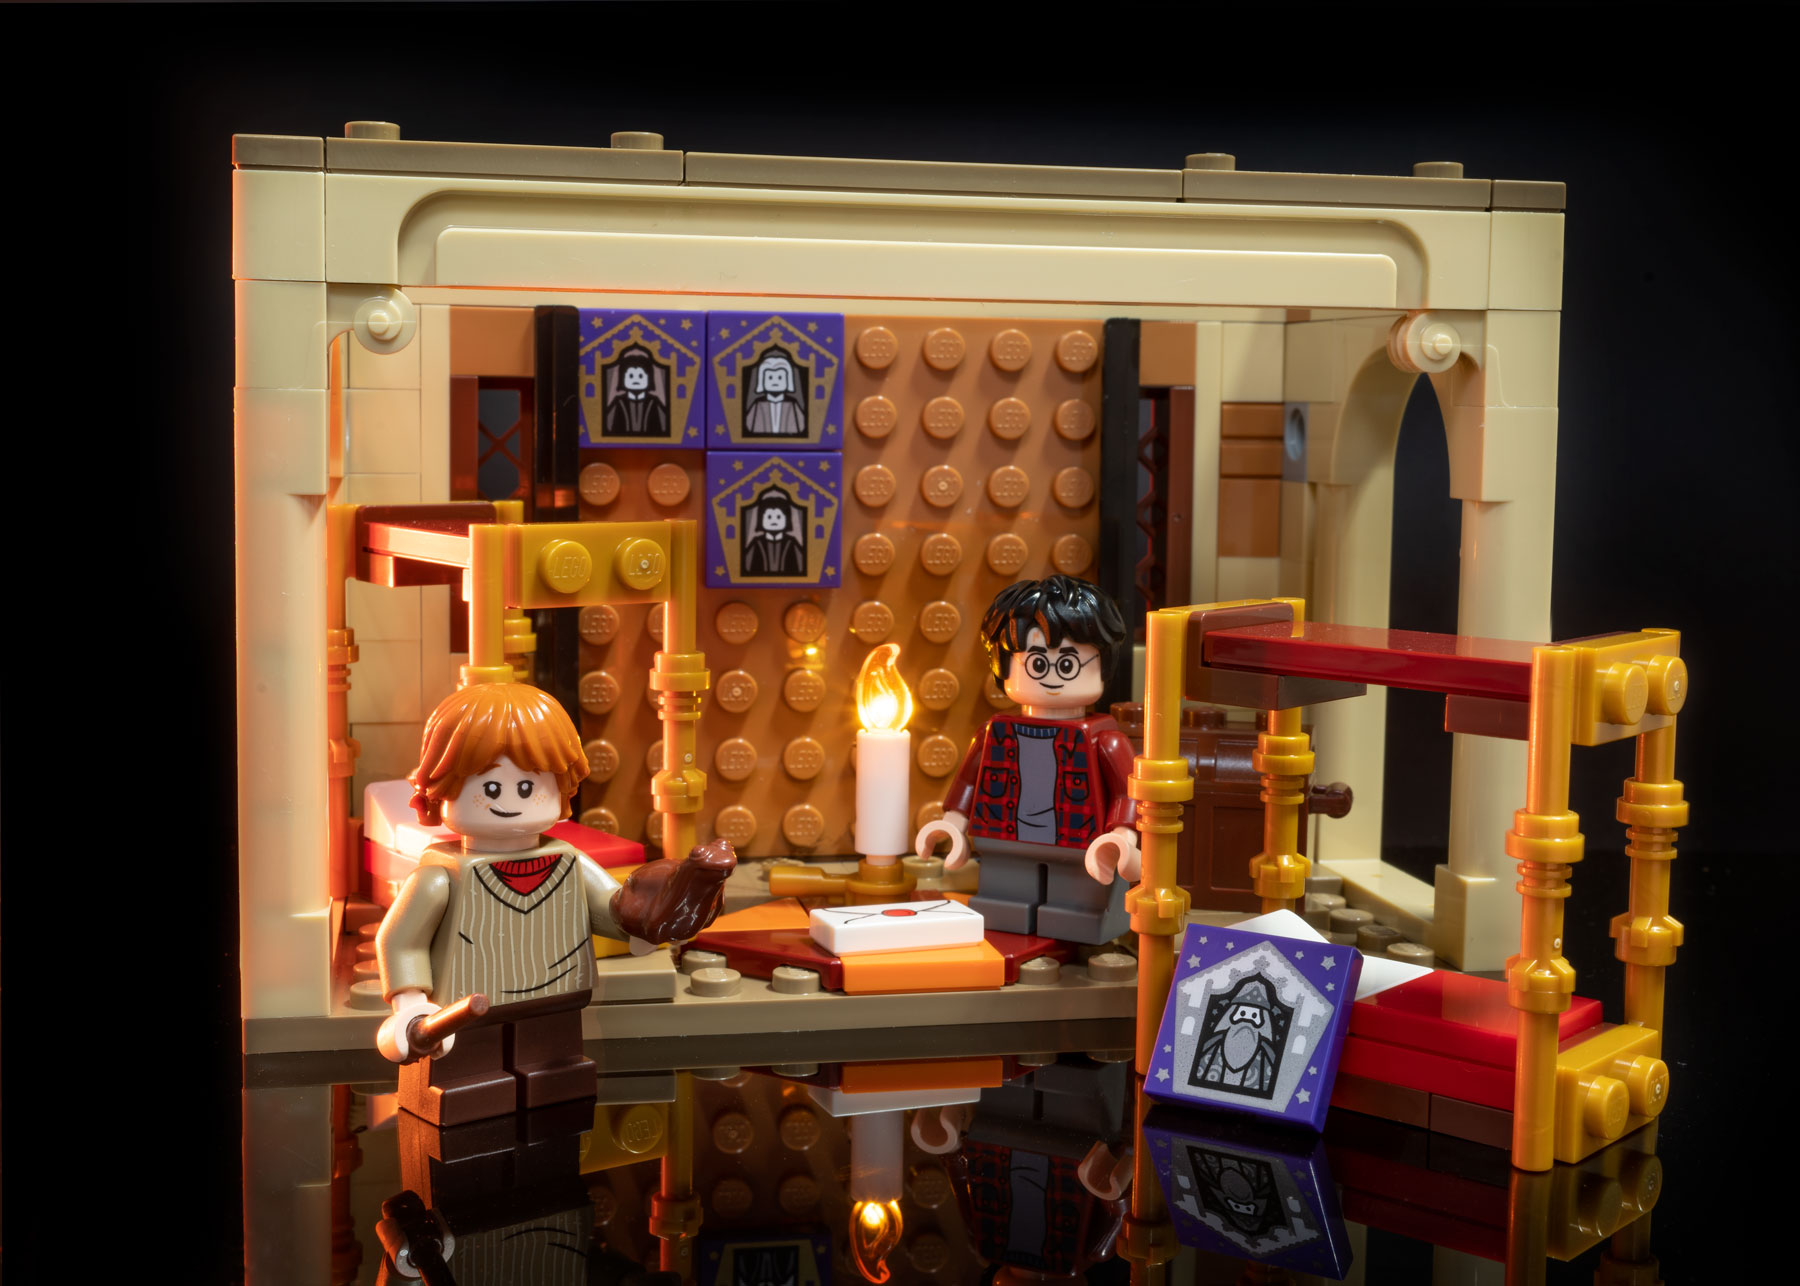 Updated LEGO Harry Potter Hogwarts Castle layout combining all the modular  sets in the series, including Gryffindor Dorms and First Flying Lesson :  r/legoharrypotter